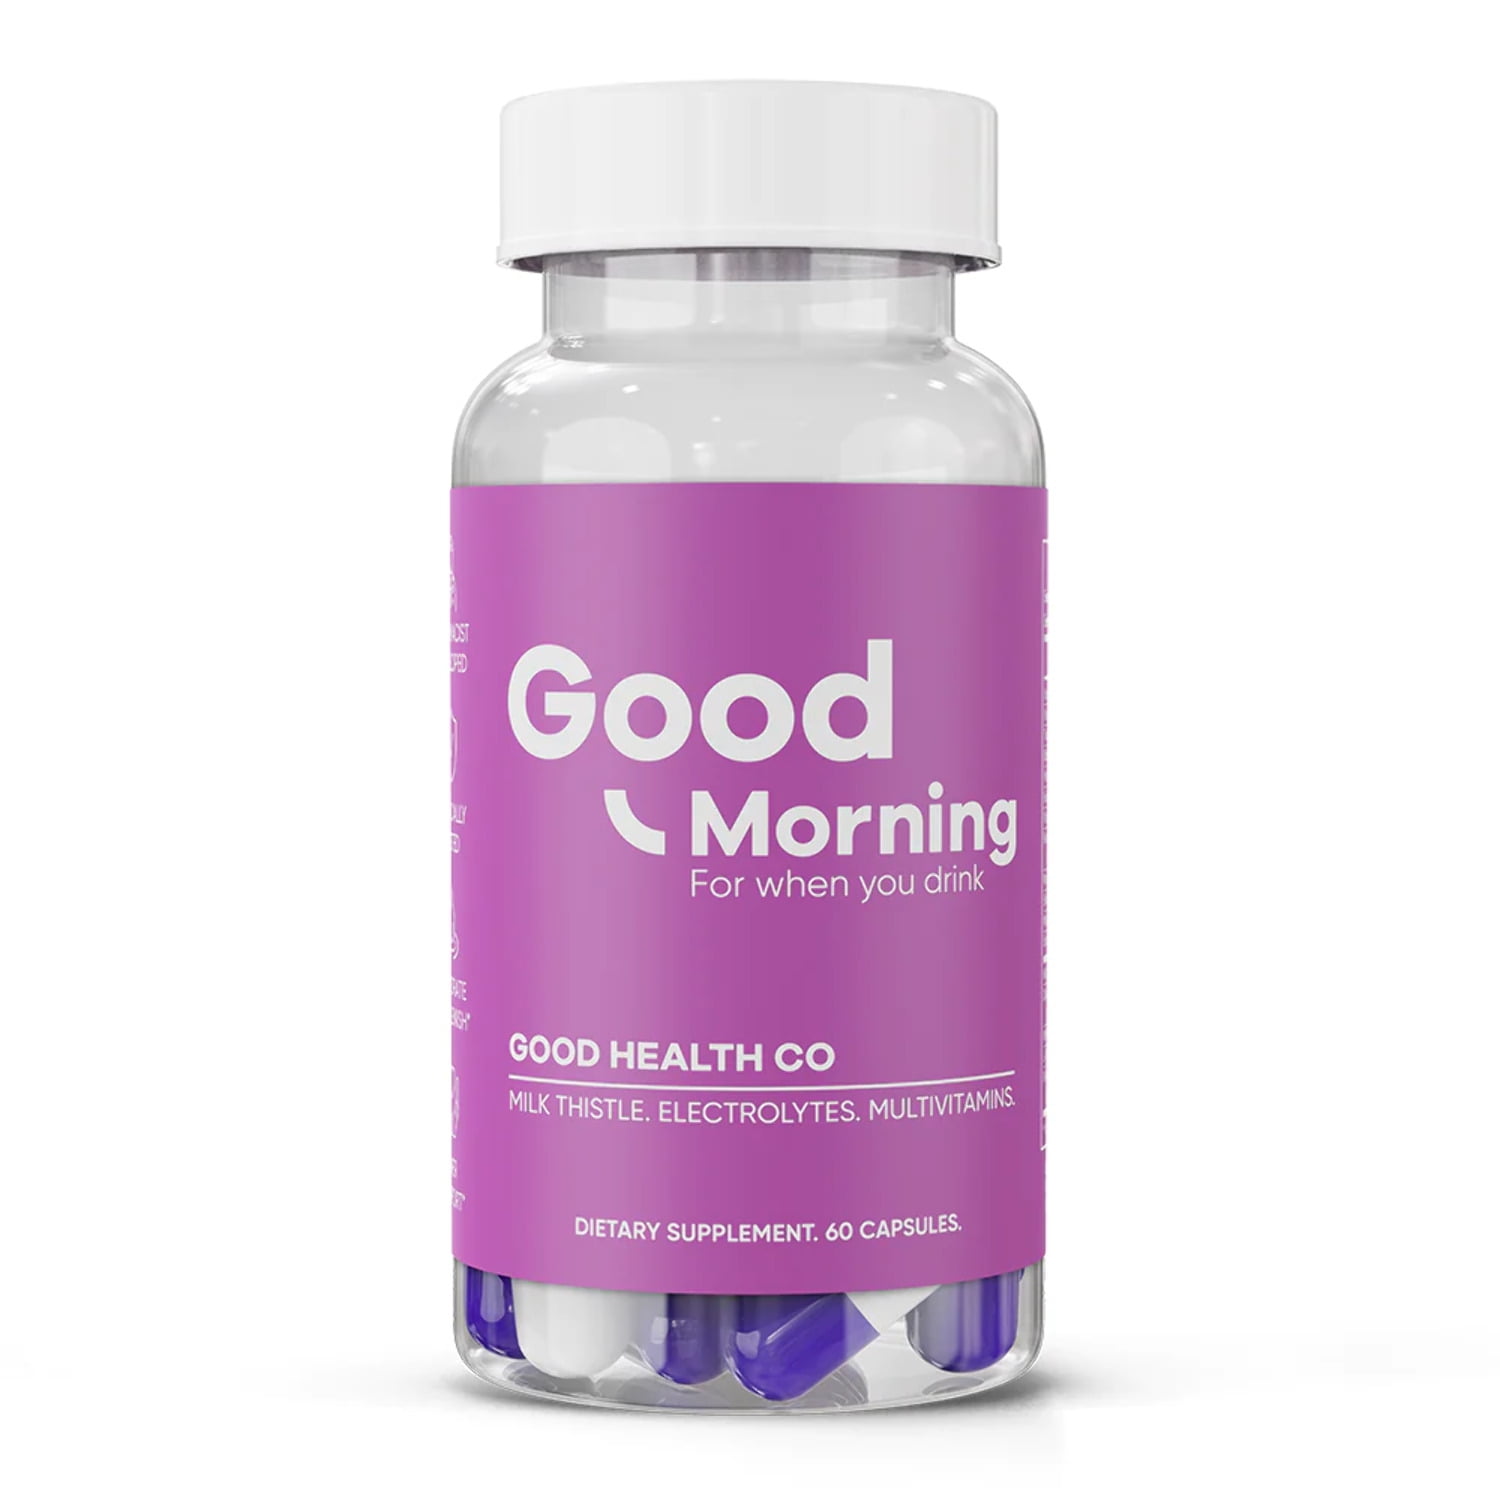 Hangover/recovery RX Pill Bottle, Hangover Relief Bottle